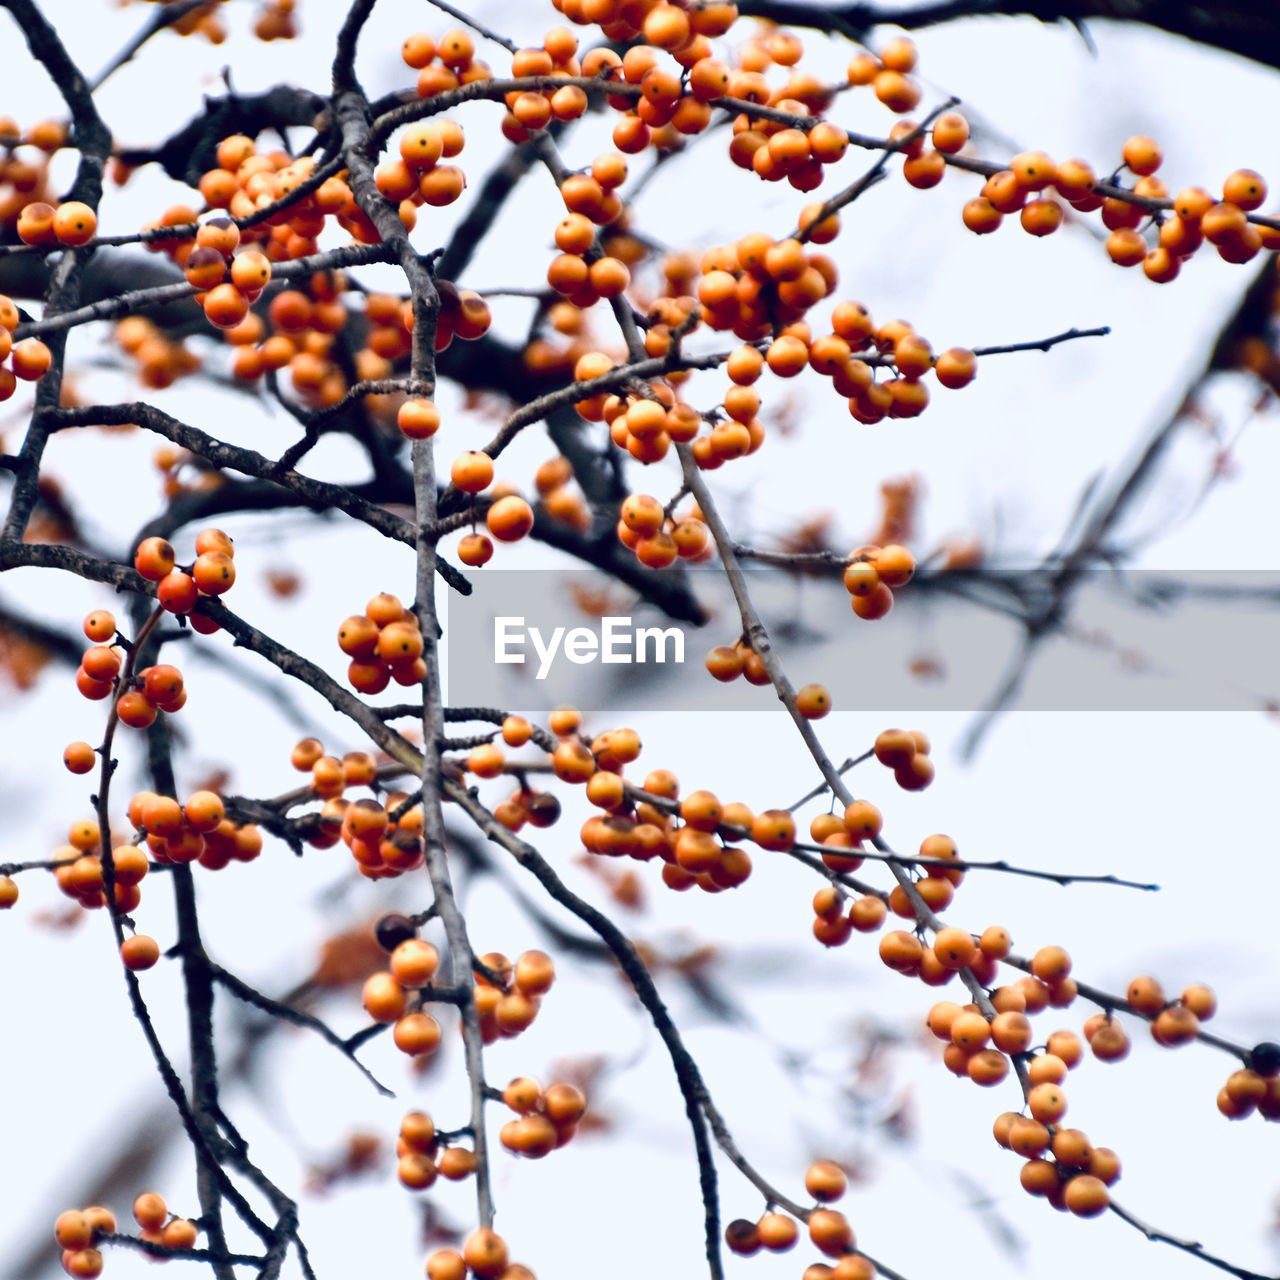 tree, plant, branch, nature, no people, food, fruit, food and drink, growth, beauty in nature, freshness, twig, healthy eating, leaf, day, low angle view, autumn, outdoors, spring, flower, focus on foreground, produce, sky, close-up, tranquility, winter, plant part, persimmon